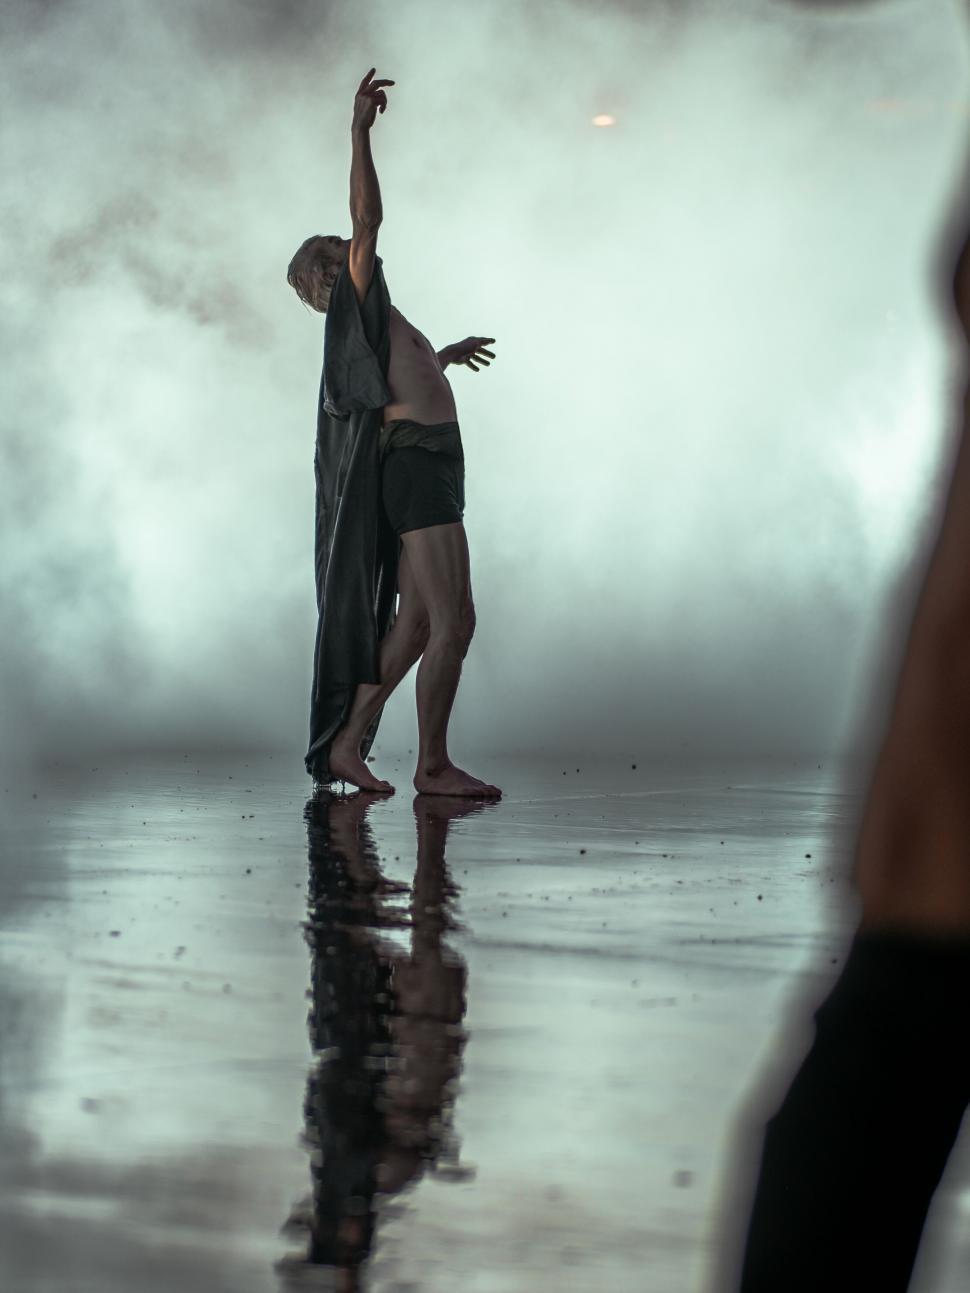 Free Image of Dancer s reflection on water in smoky room 